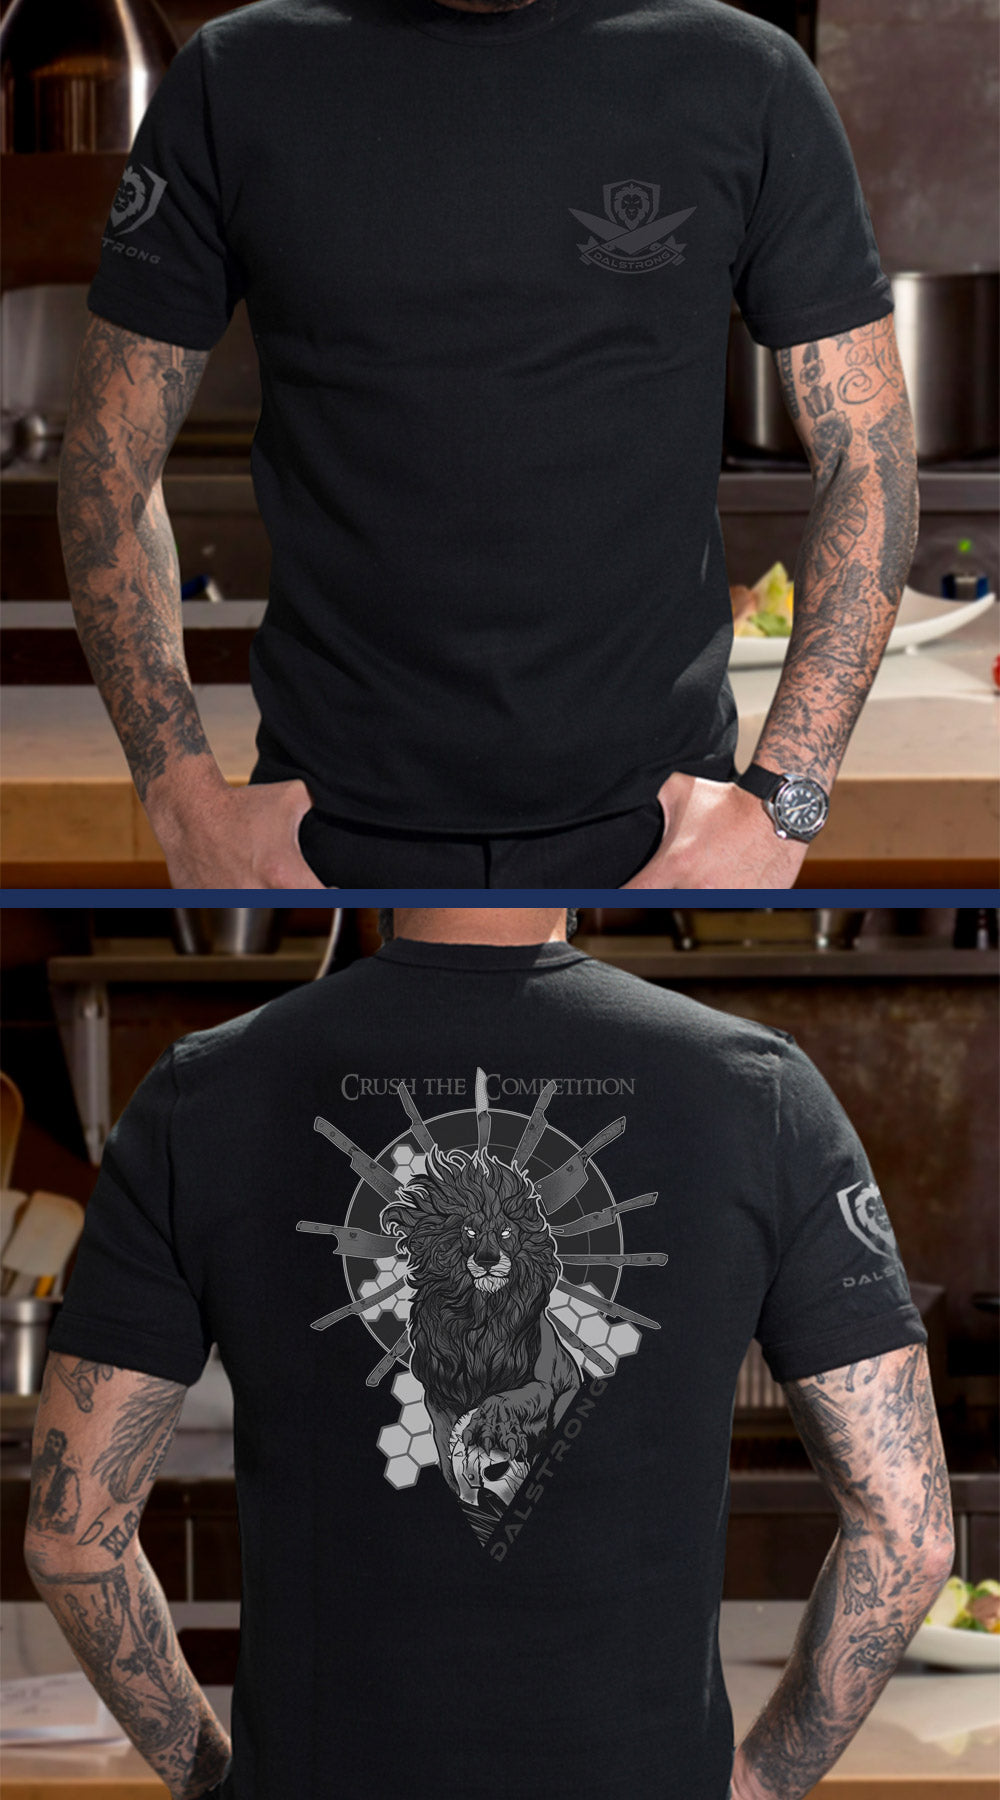 Dalstrong skull crusher tee black front and back preview.